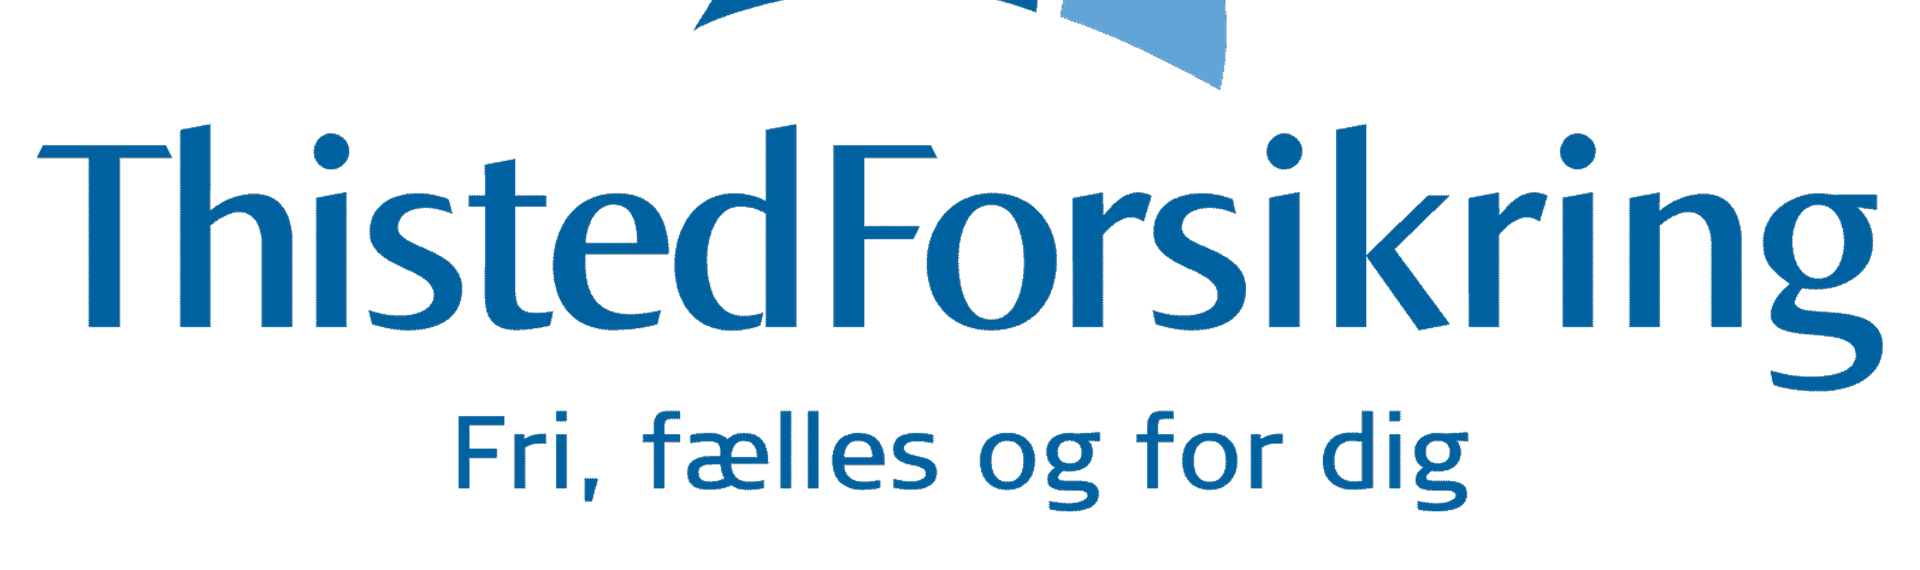 thisted forsikring logo.png